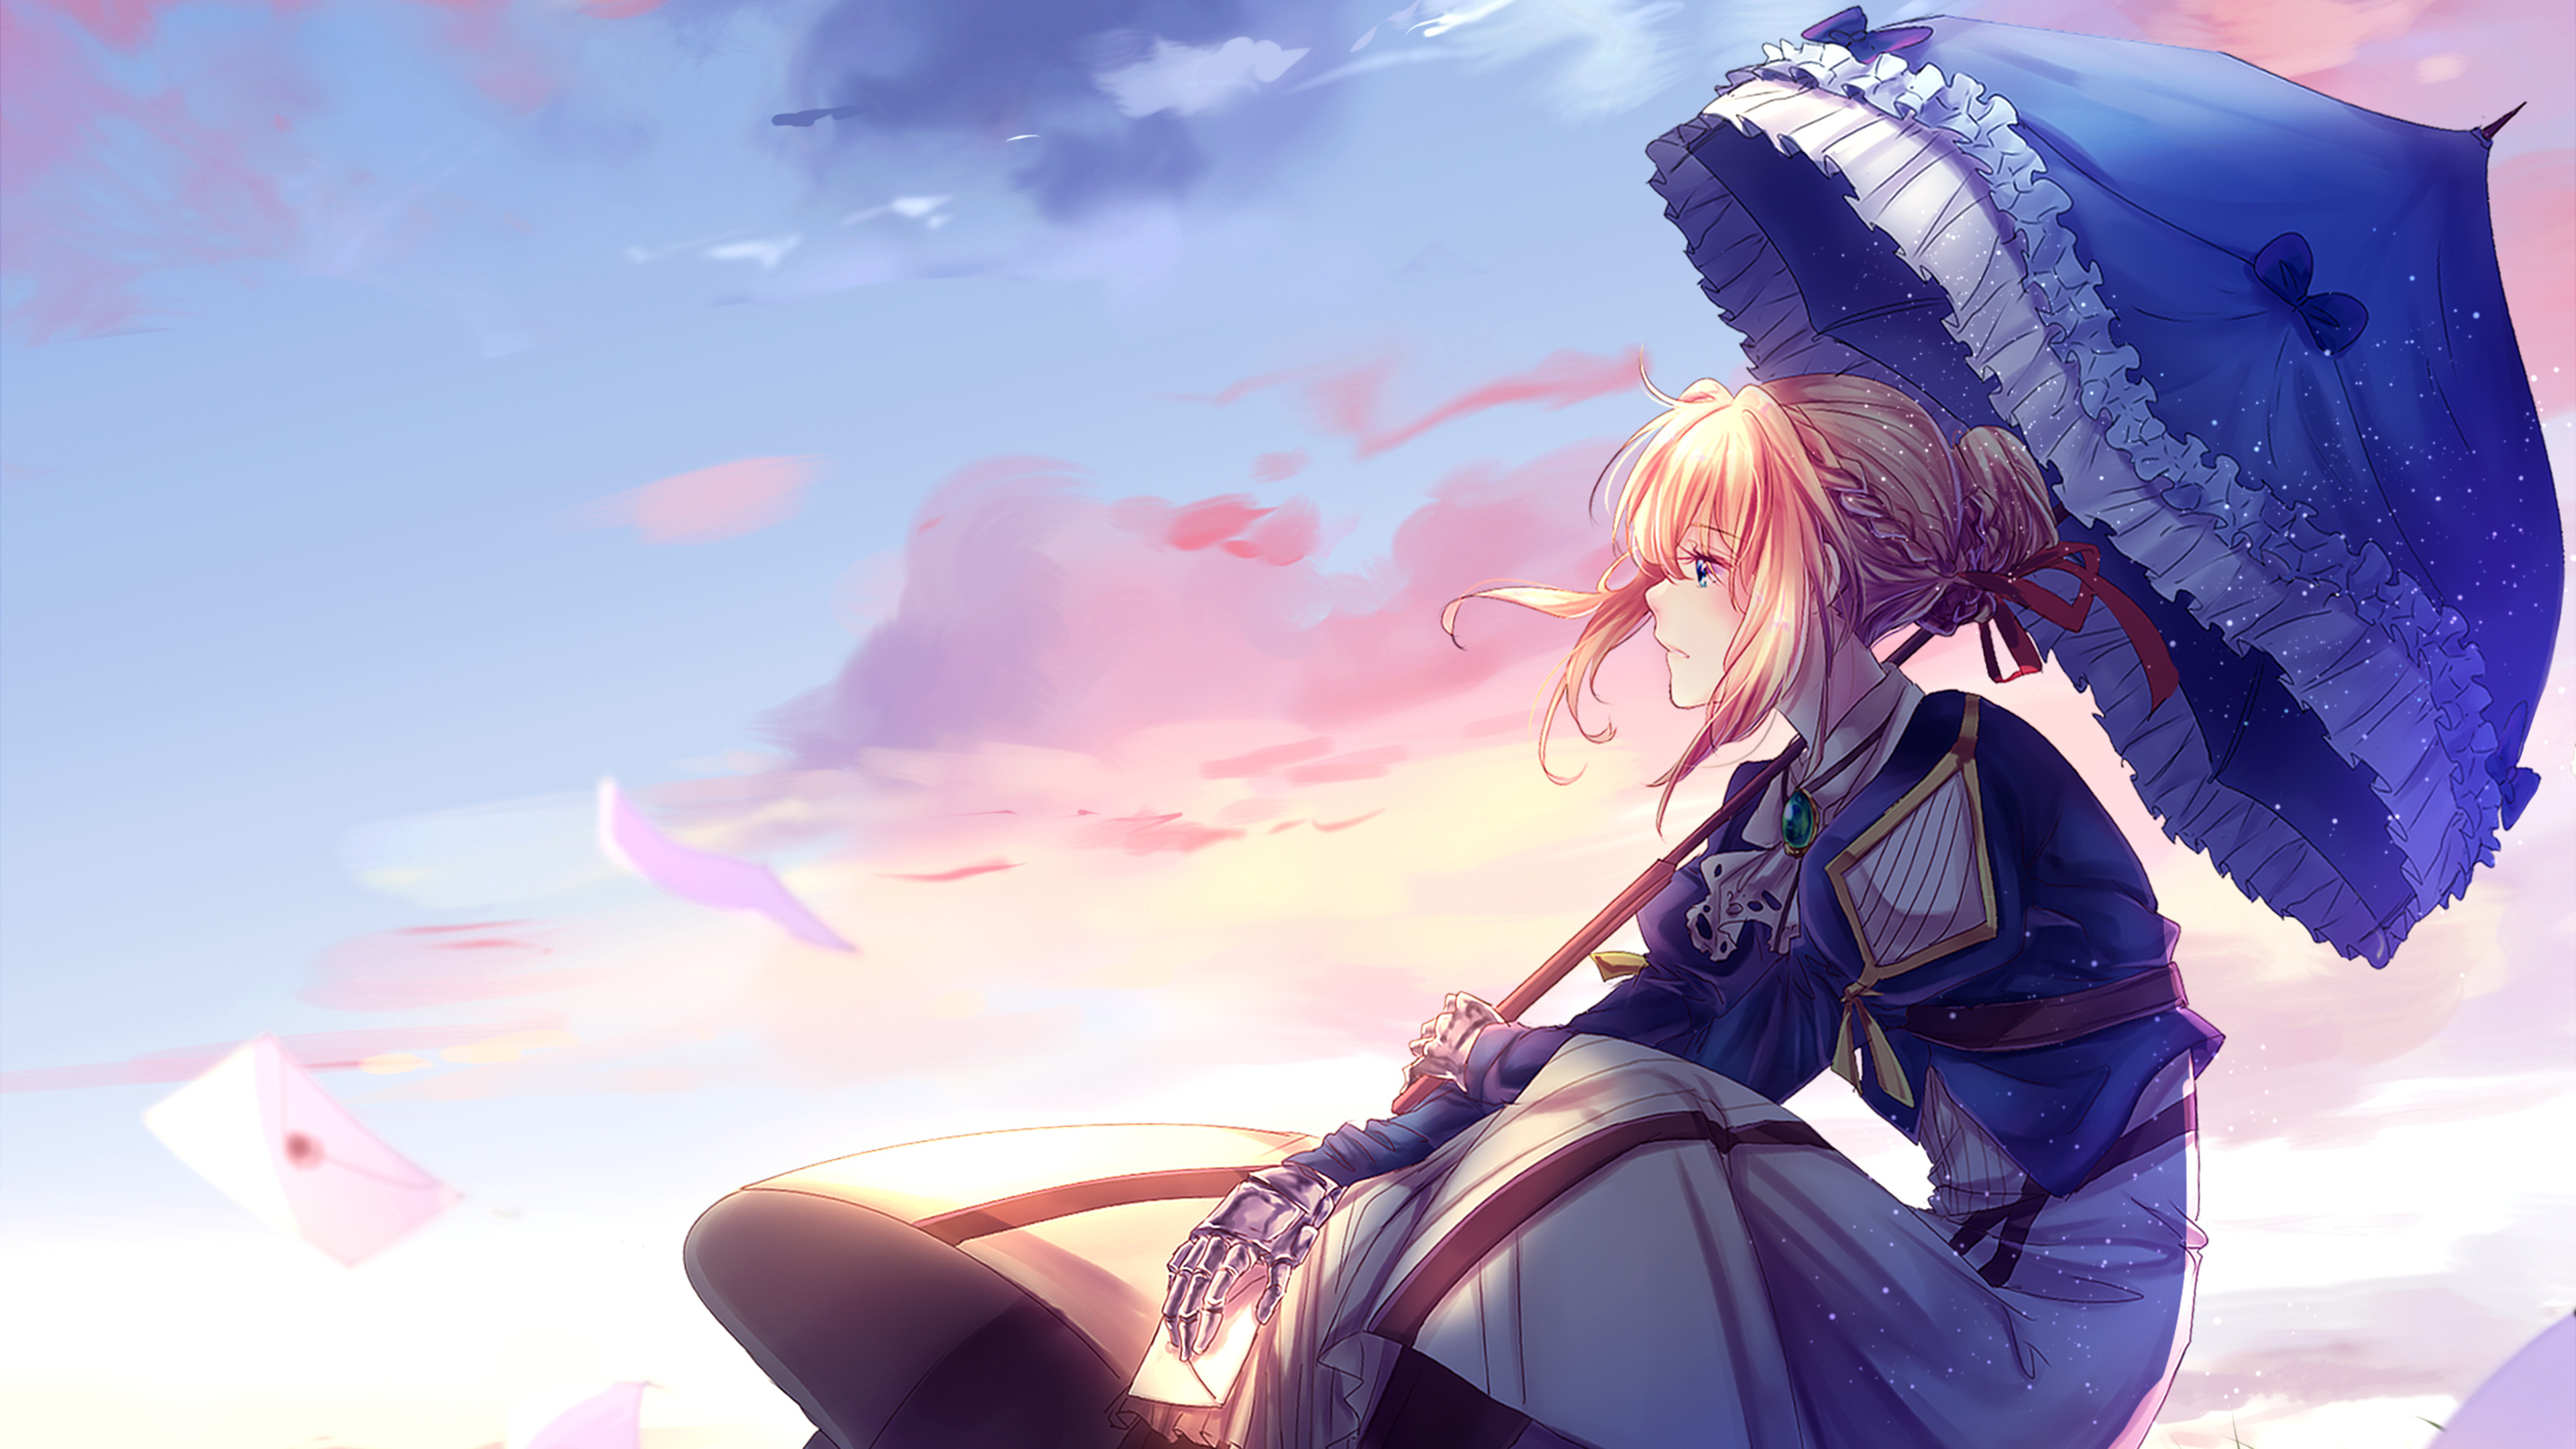 3840x2160 Anime Violet Evergarden Art 4k Hd 4k Wallpapers Images Backgrounds Photos And Pictures